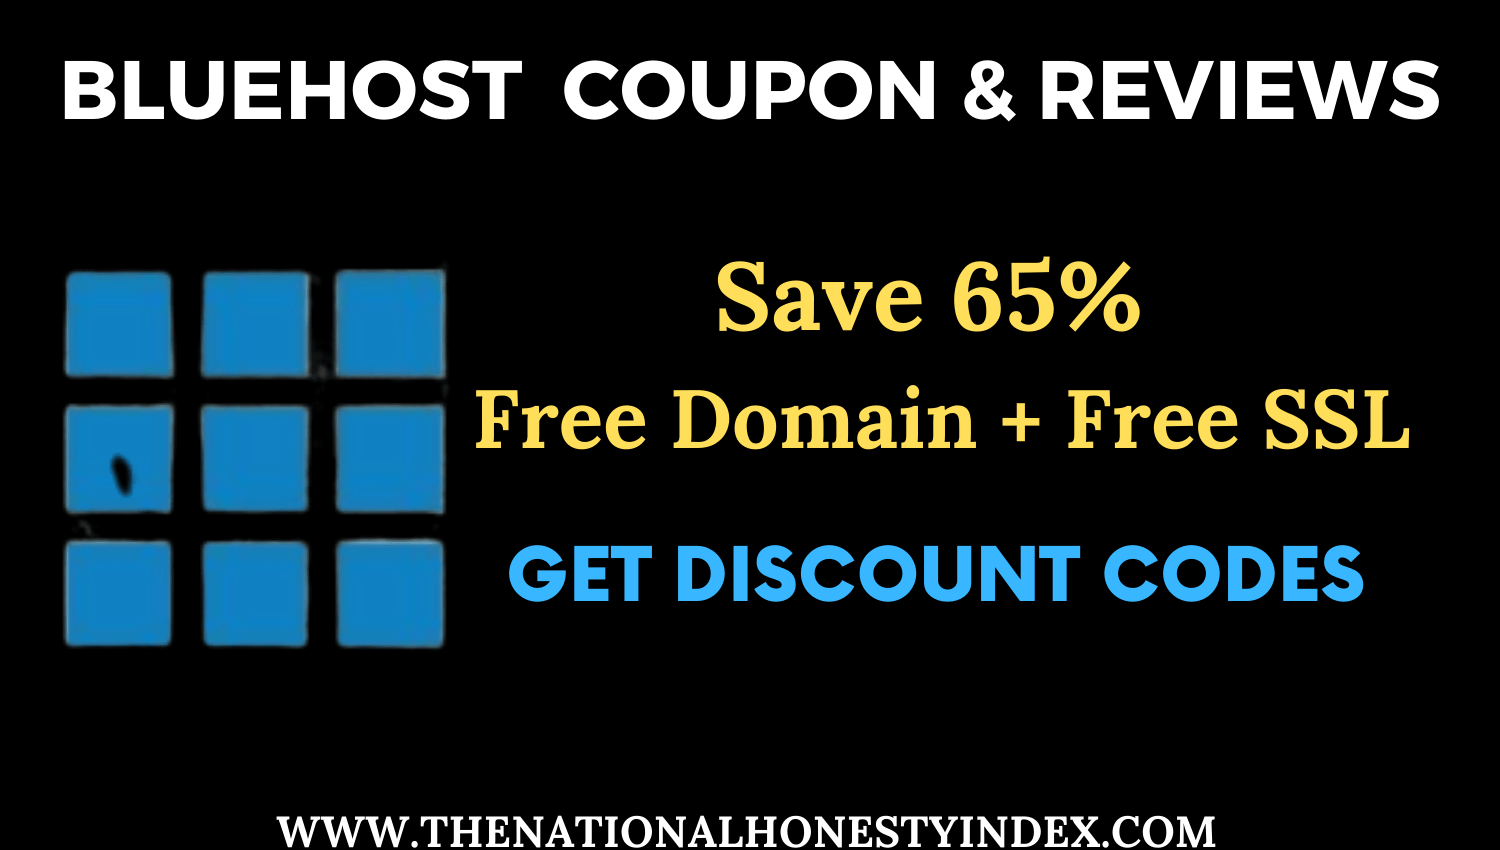 BlueHost Coupon & Review 